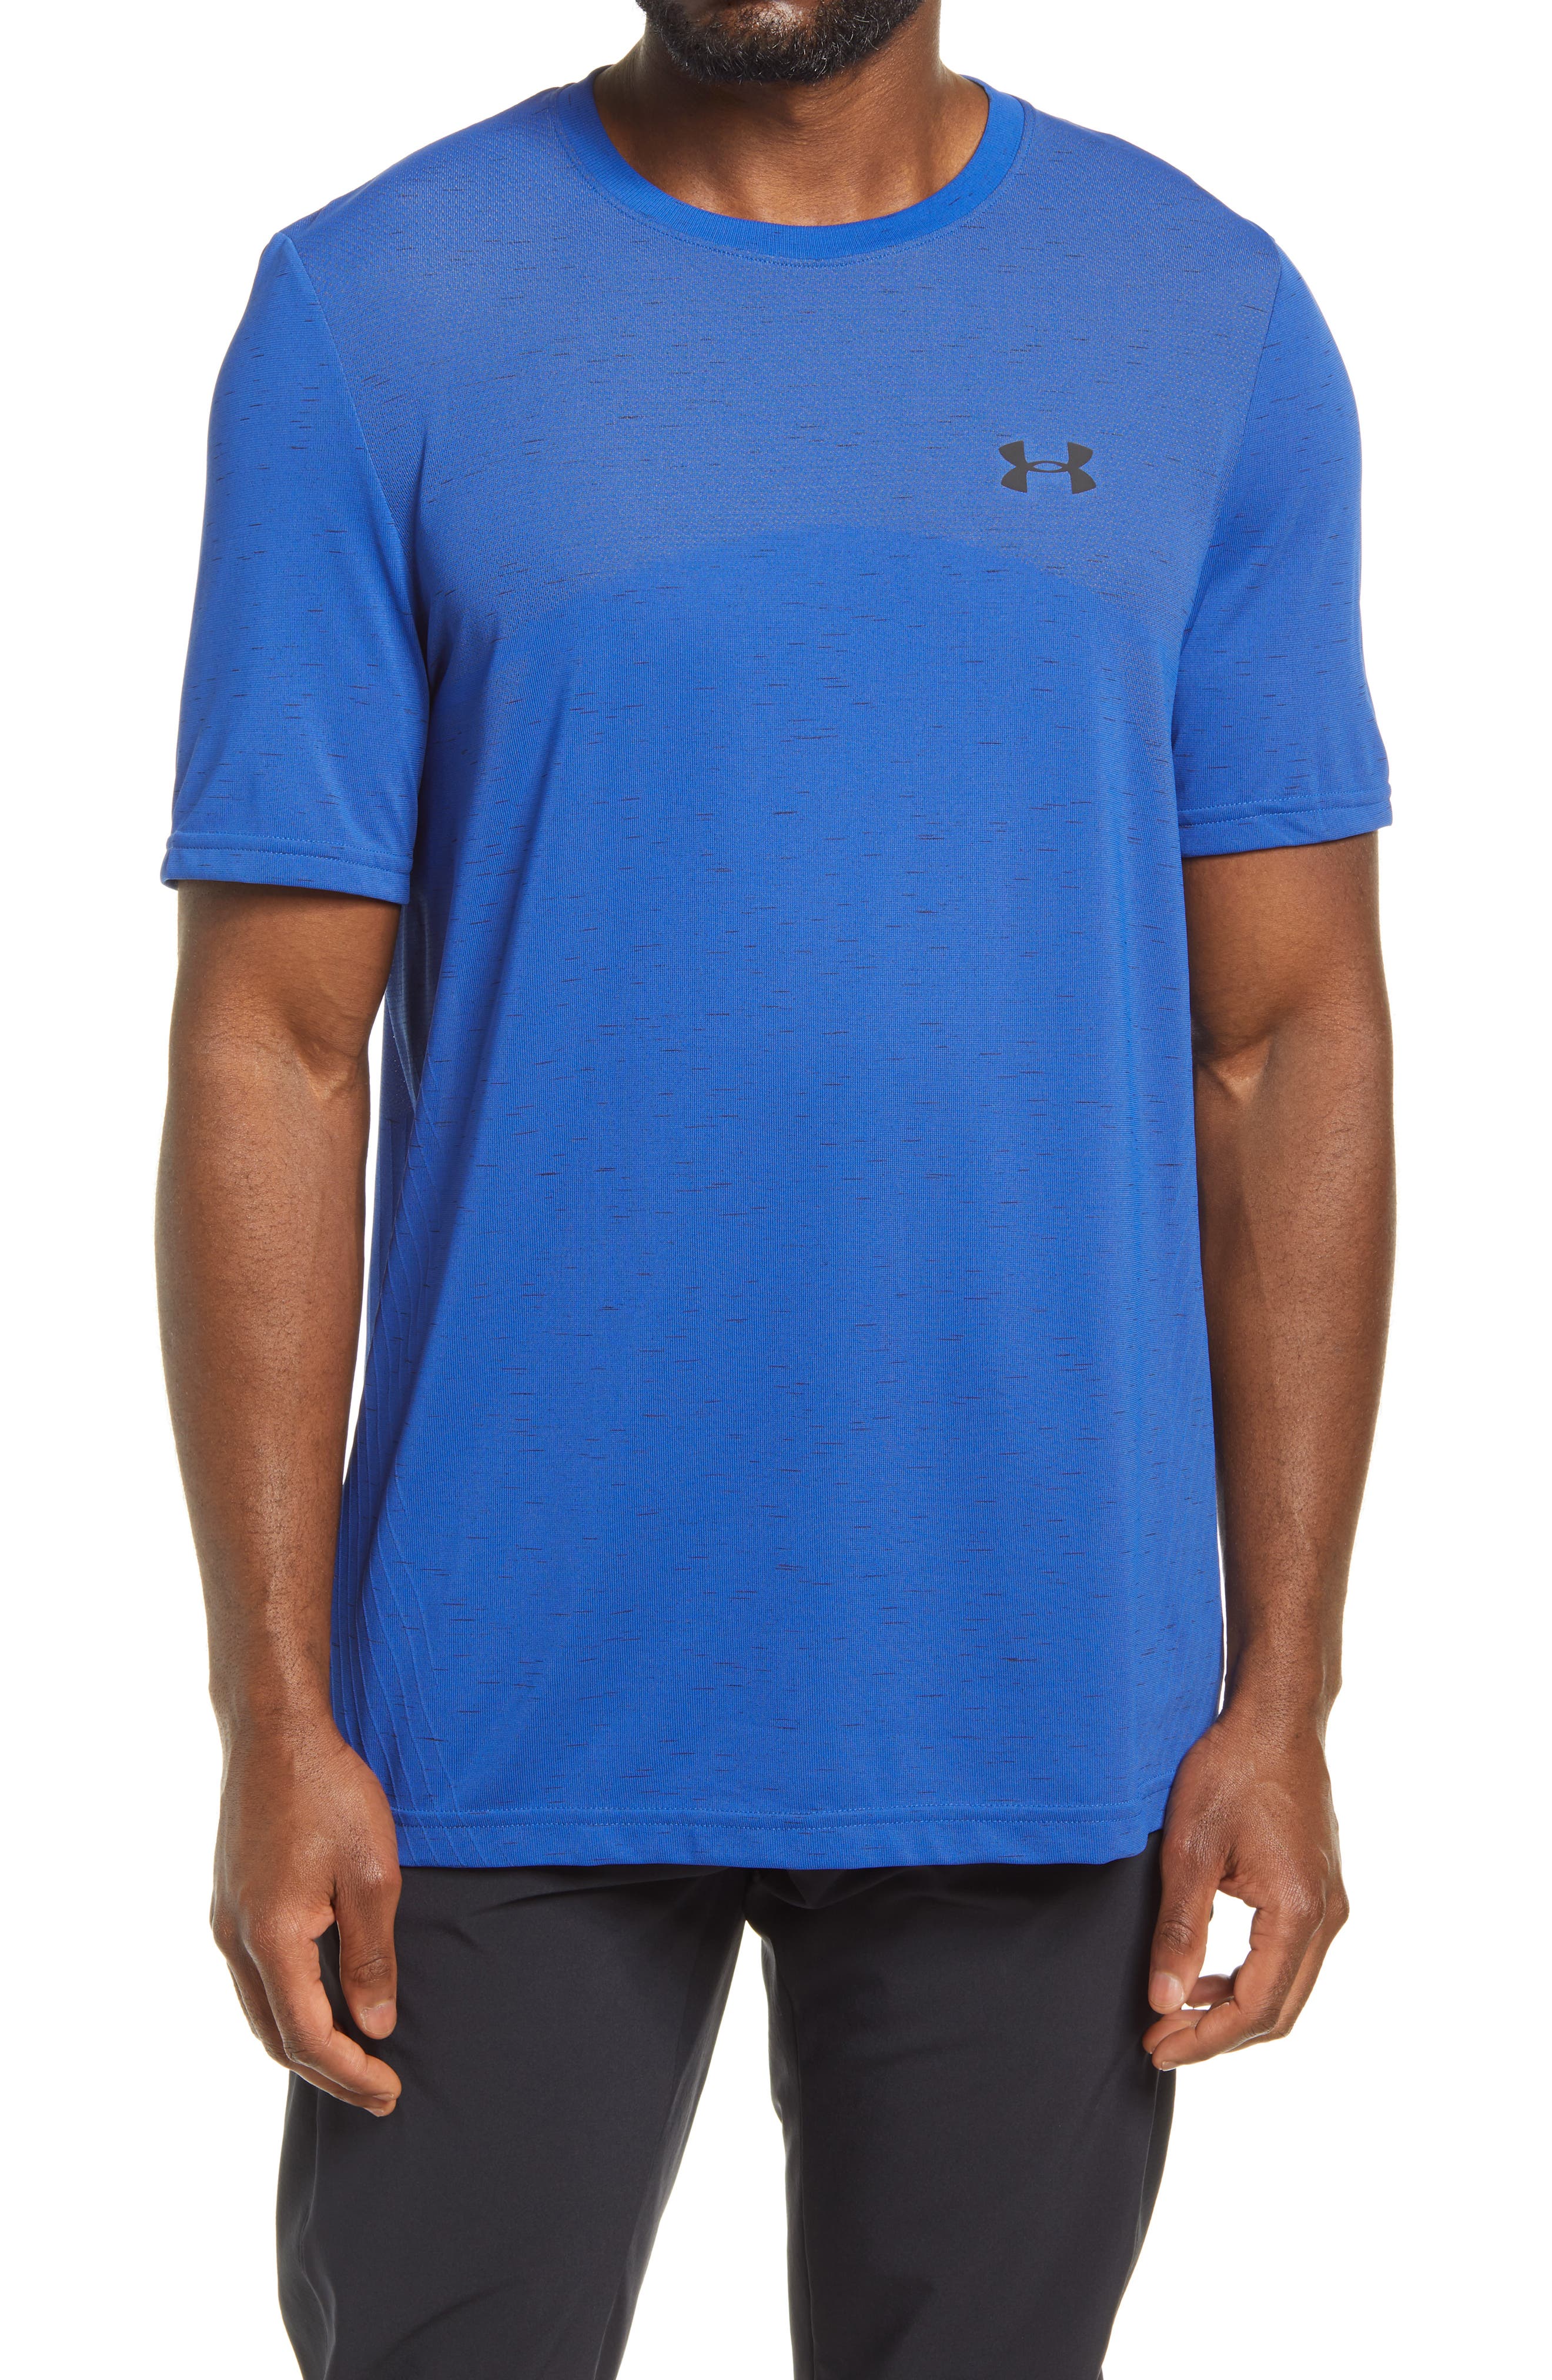 under armour athletic shirts